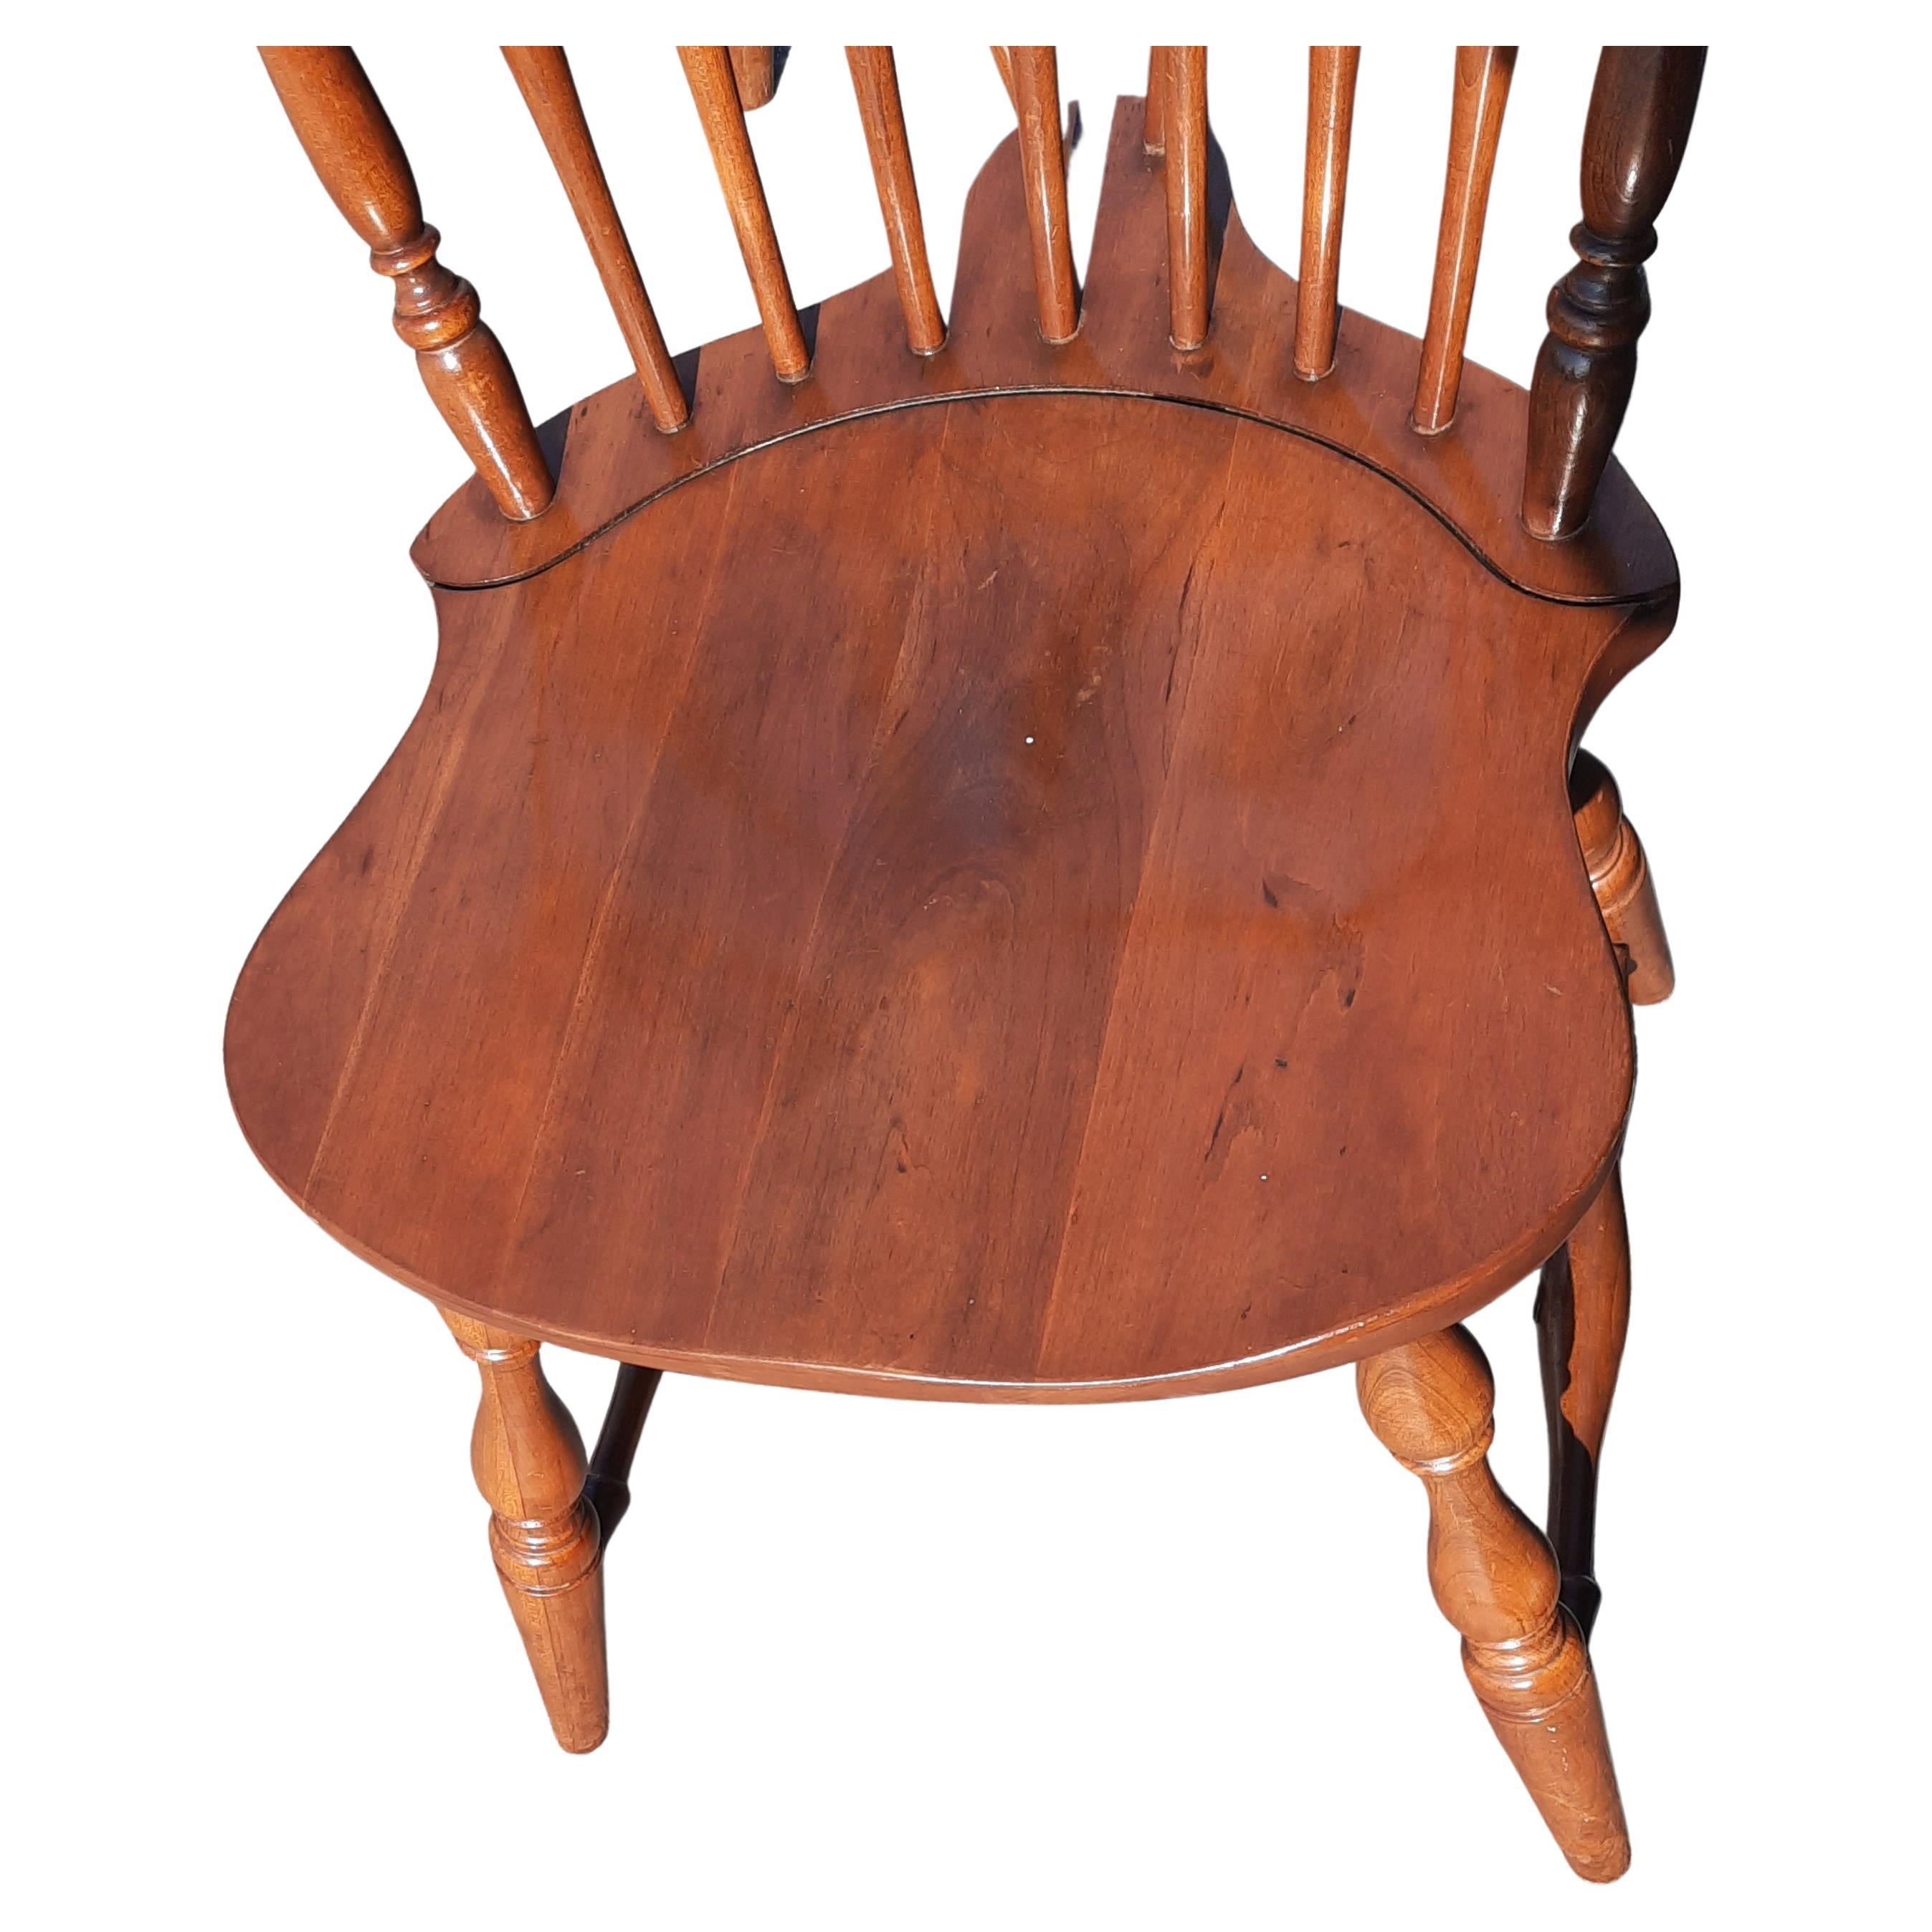 American Colonial Pennsylvania House Solid Cherry Fiddleback Brace Back Windsor Chairs, C. 1940s